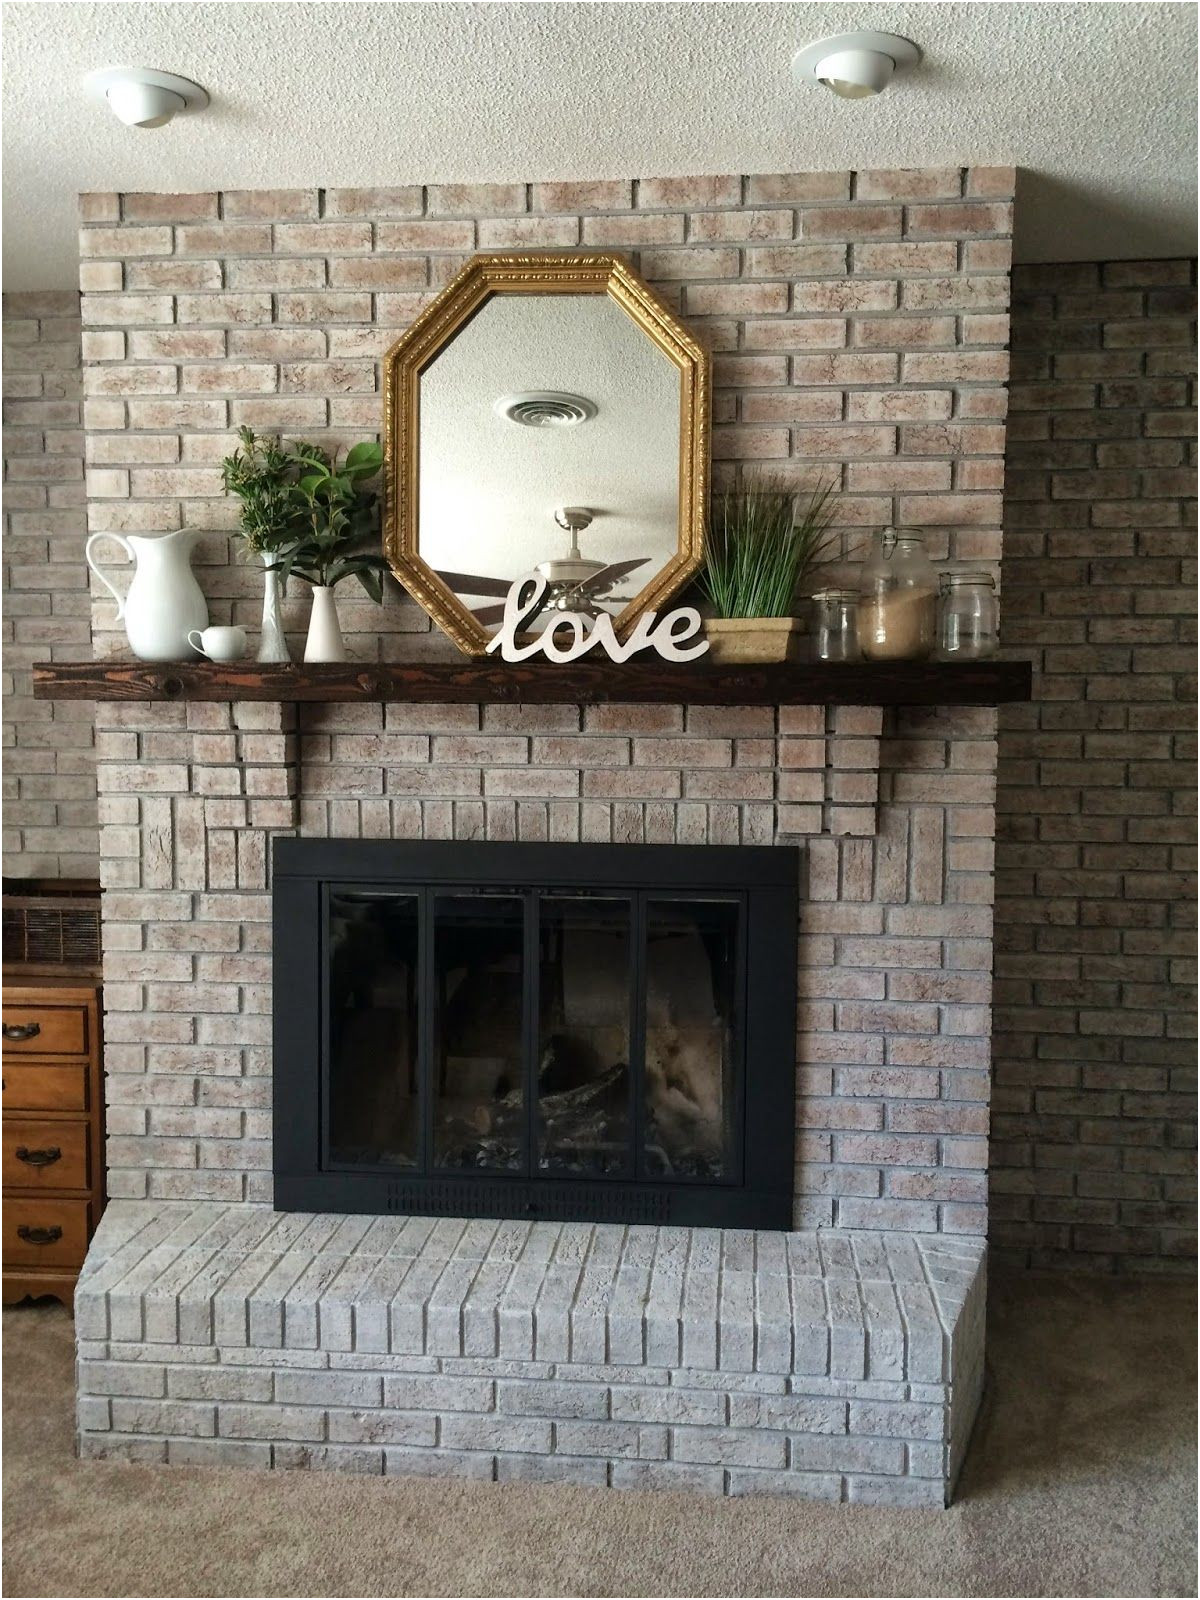 Fireplace Painting Ideas Brick Inspirational White Washing Brick with Gray Beige Walking with Dancers